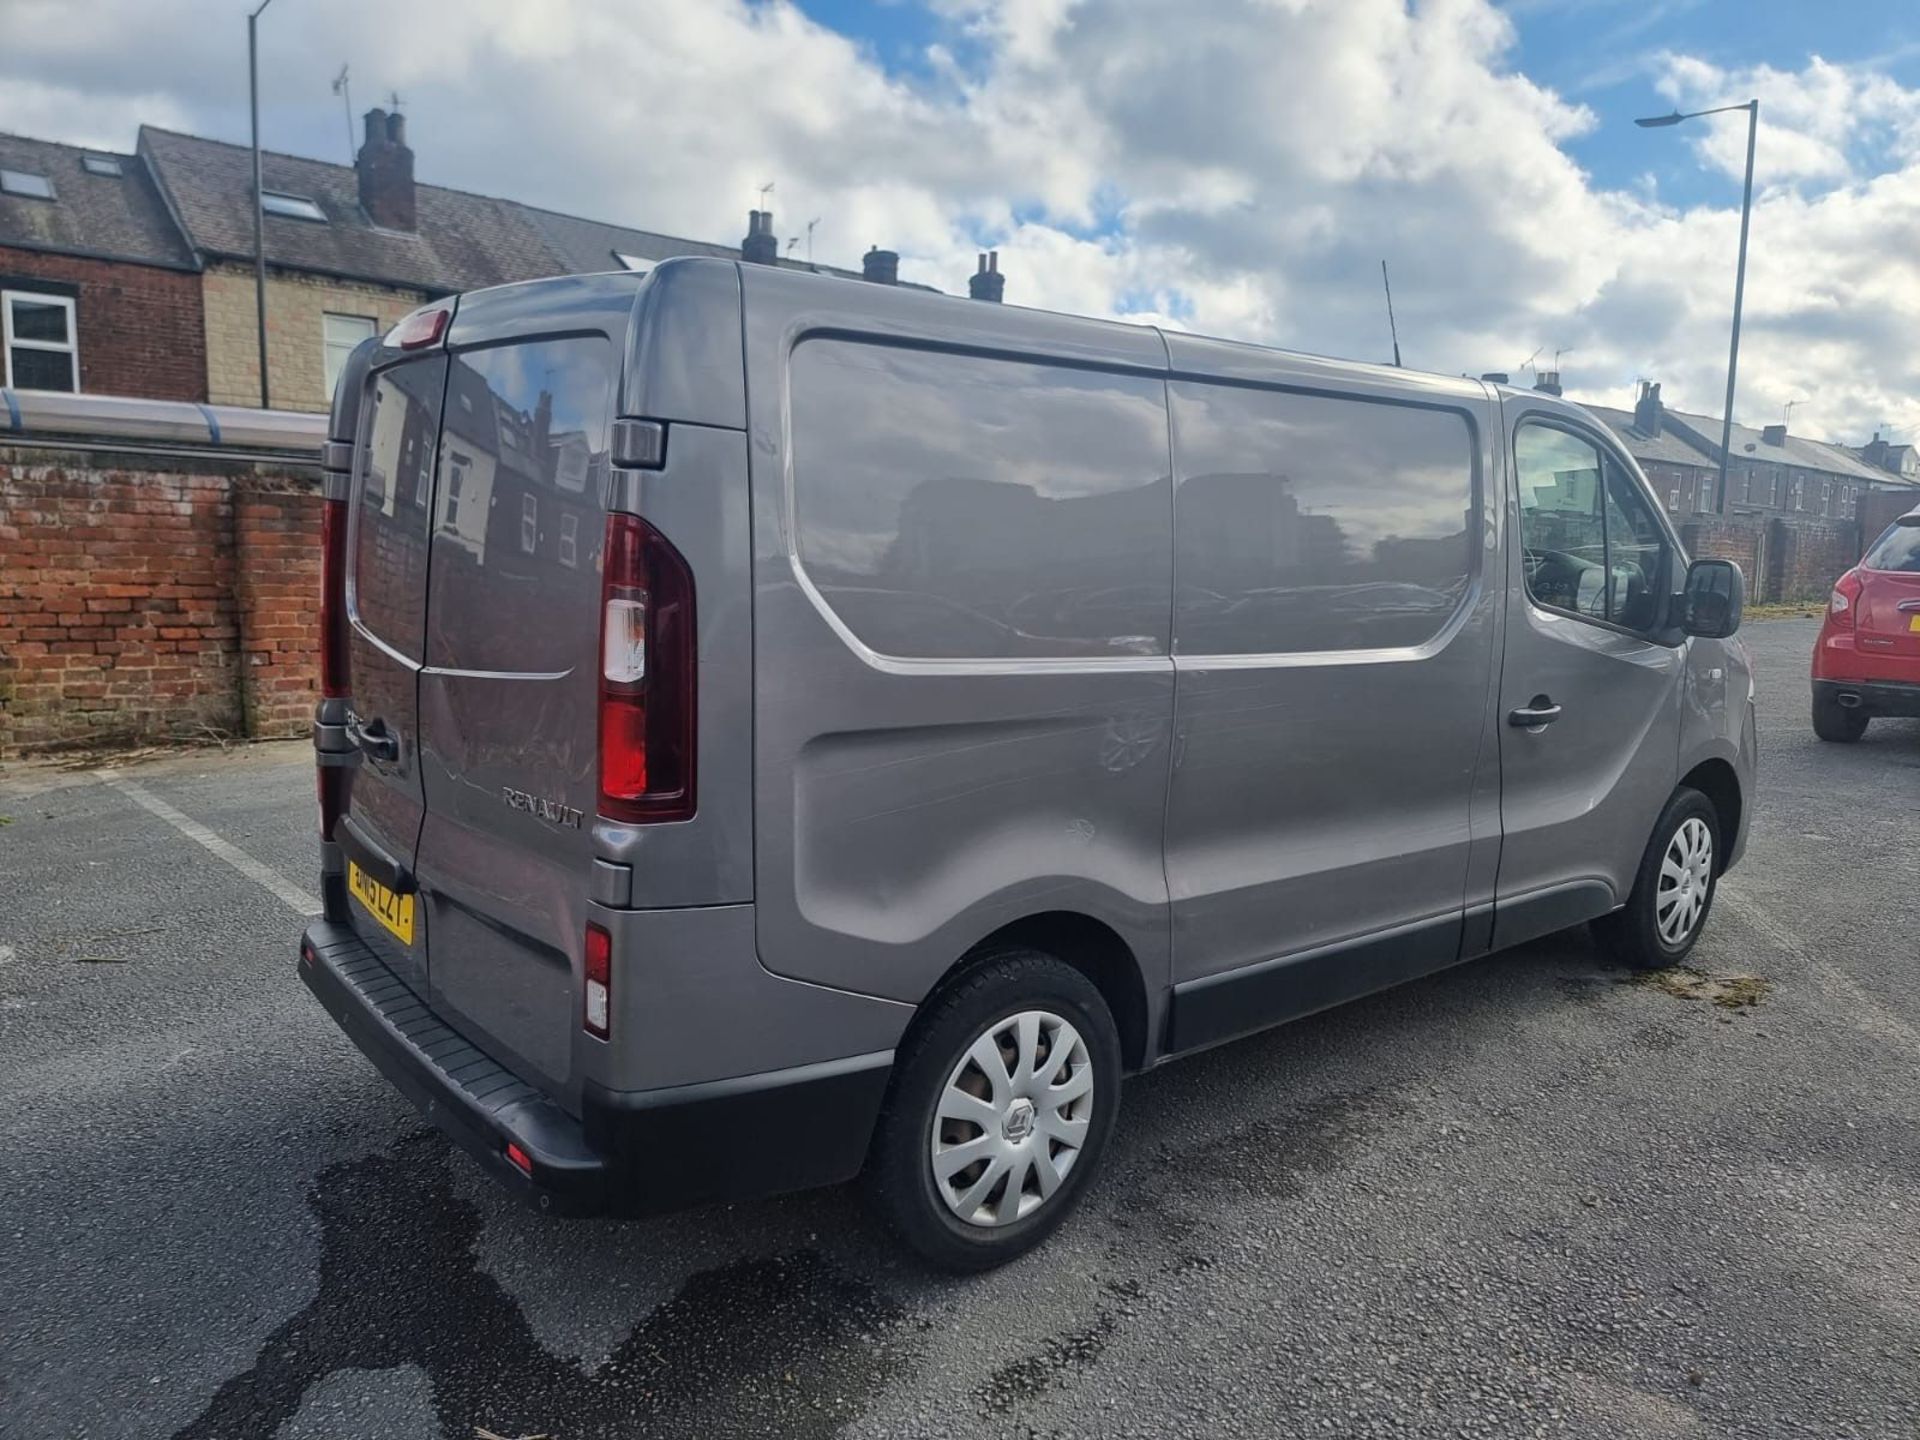 DN15 LZT RENAULT TRAFIC 2.7T 1.6 SL27 DCI 115 BUSINESS+ Panel Van. Comes with 1 key Date of - Image 4 of 7